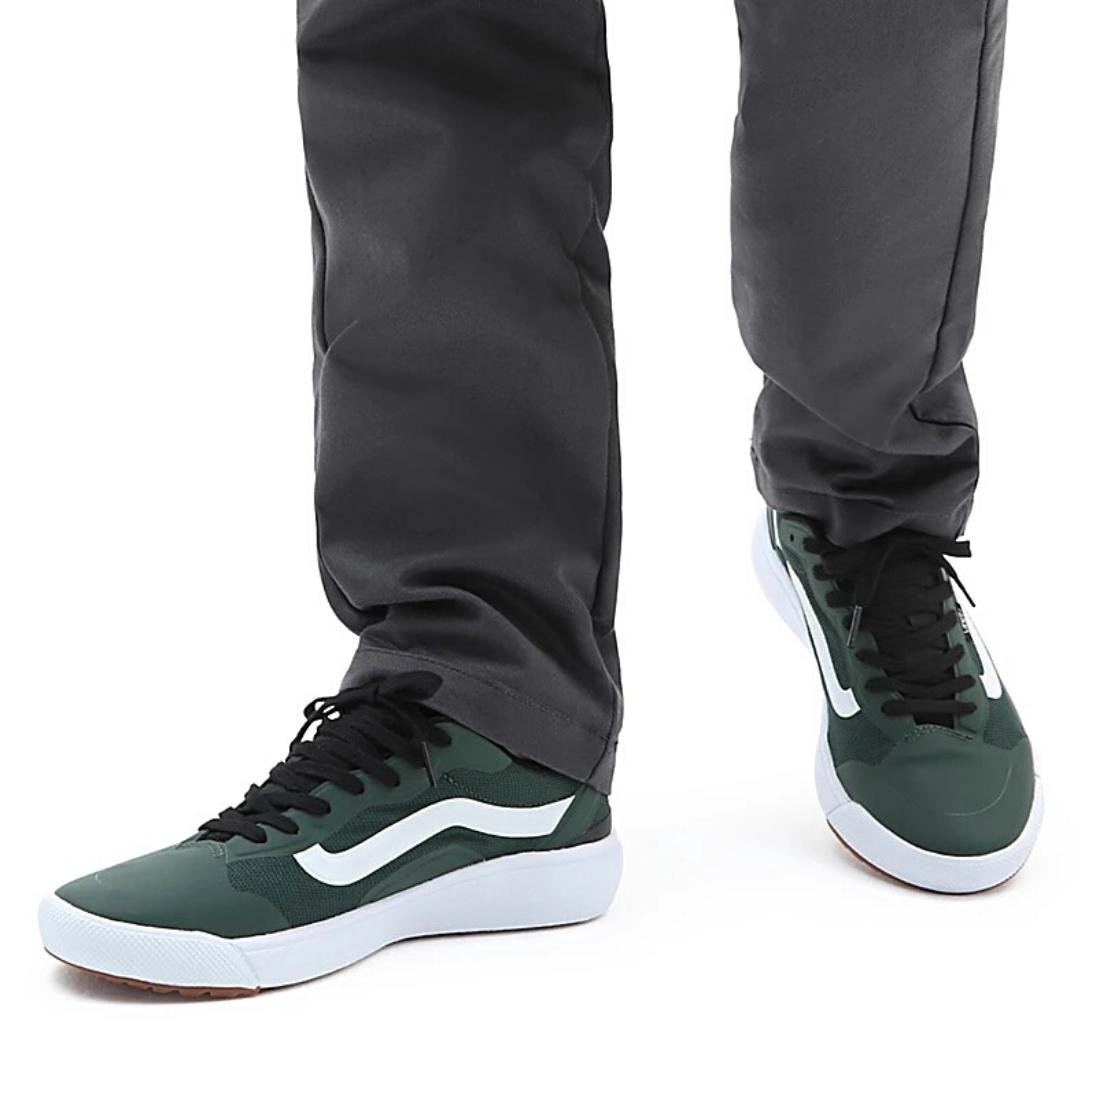 Vans Ultrarange Exo Shoes - Mountain View - Mens Running Shoes/Trainers by Vans